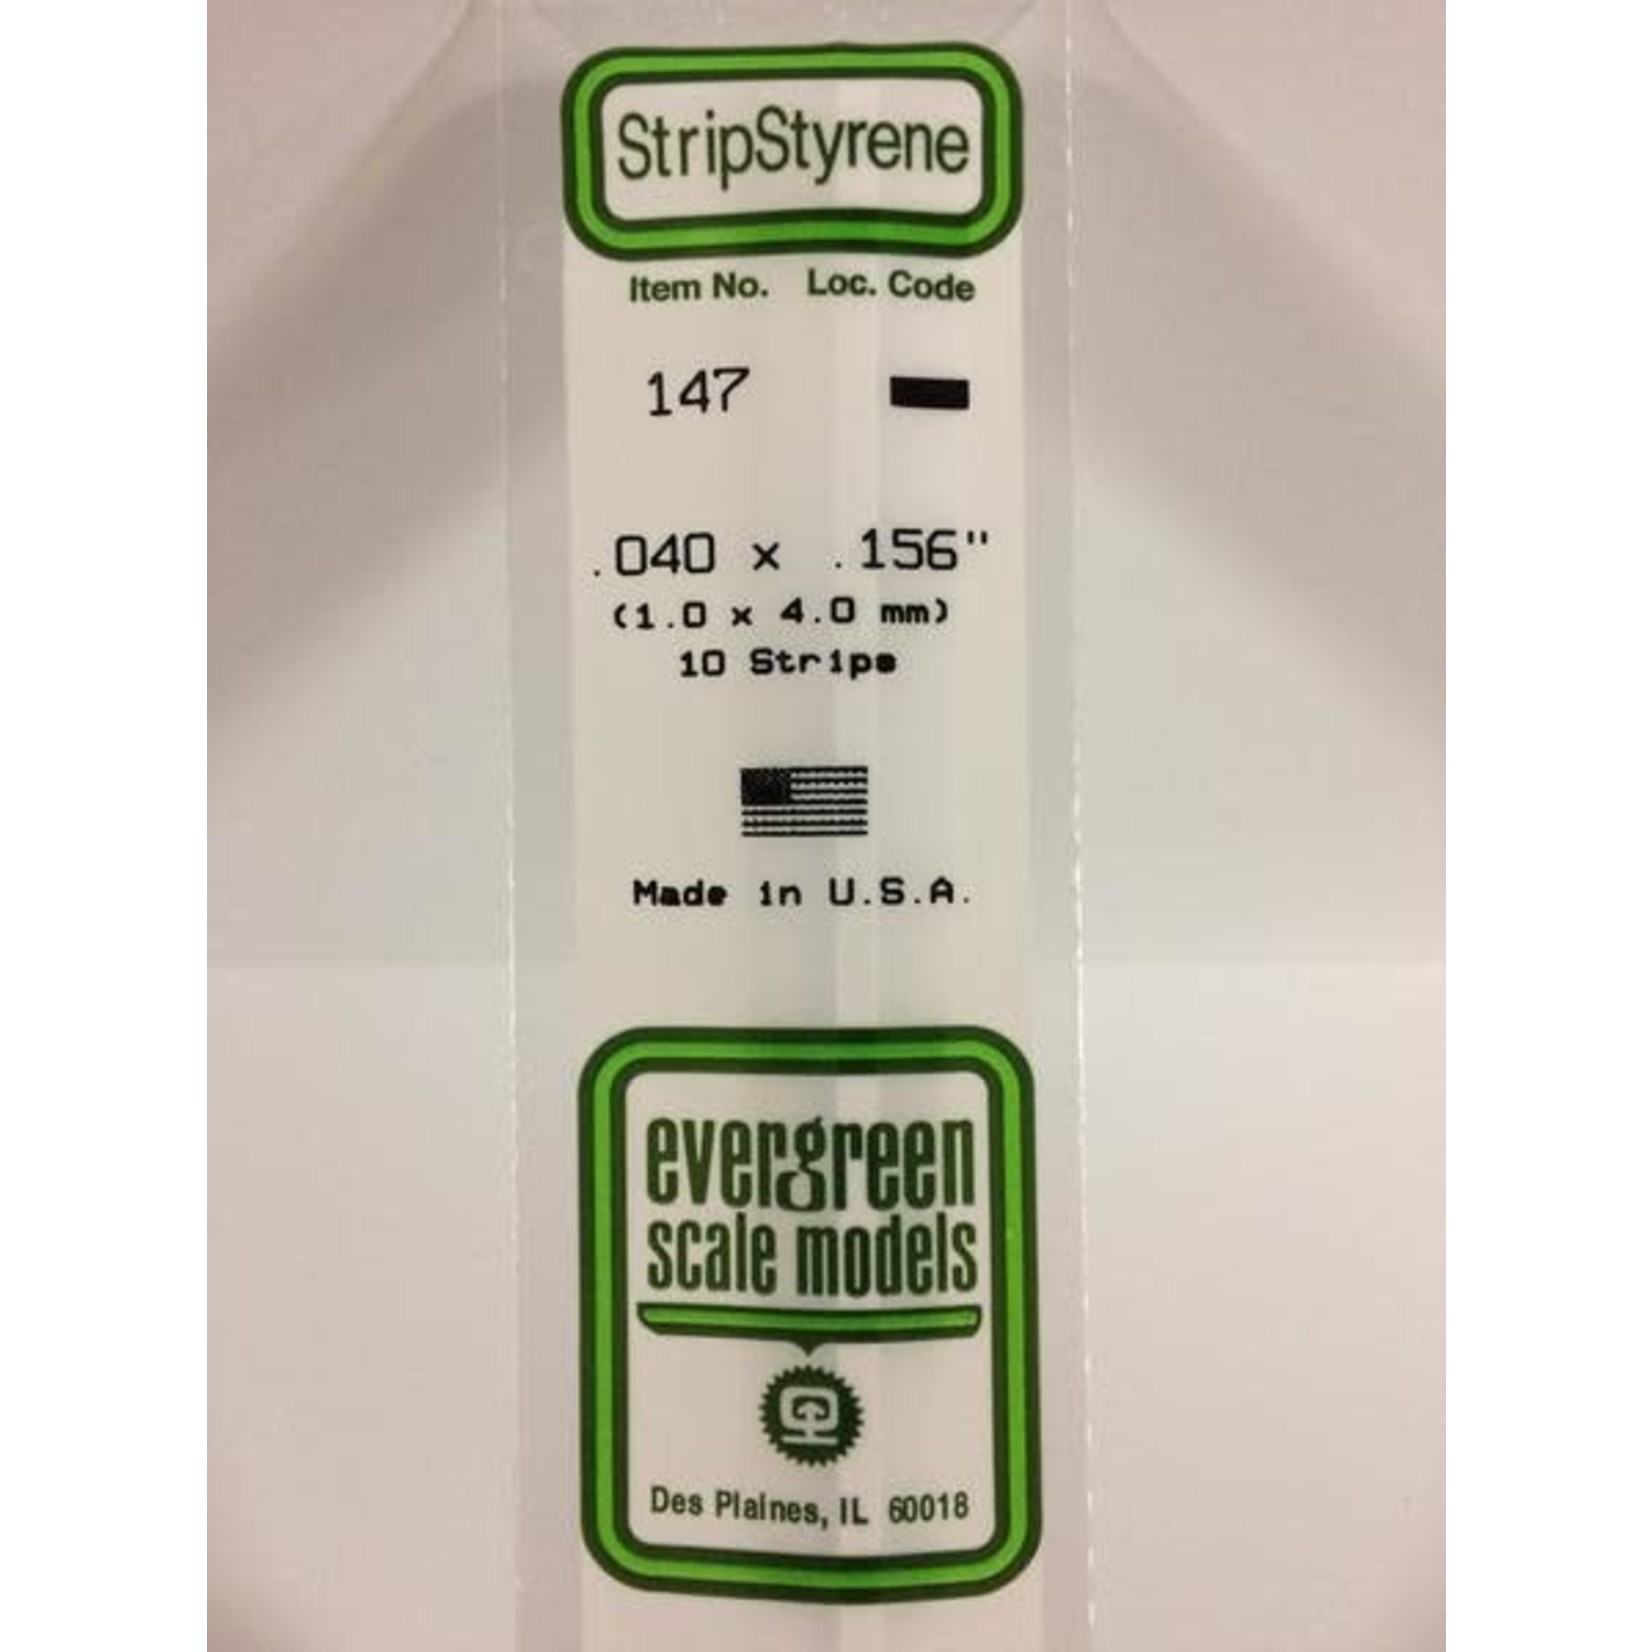 Evergreen Scale Models Evergreen 147 - .040" X .156" OPAQUE WHITE POLYSTYRENE STRIP